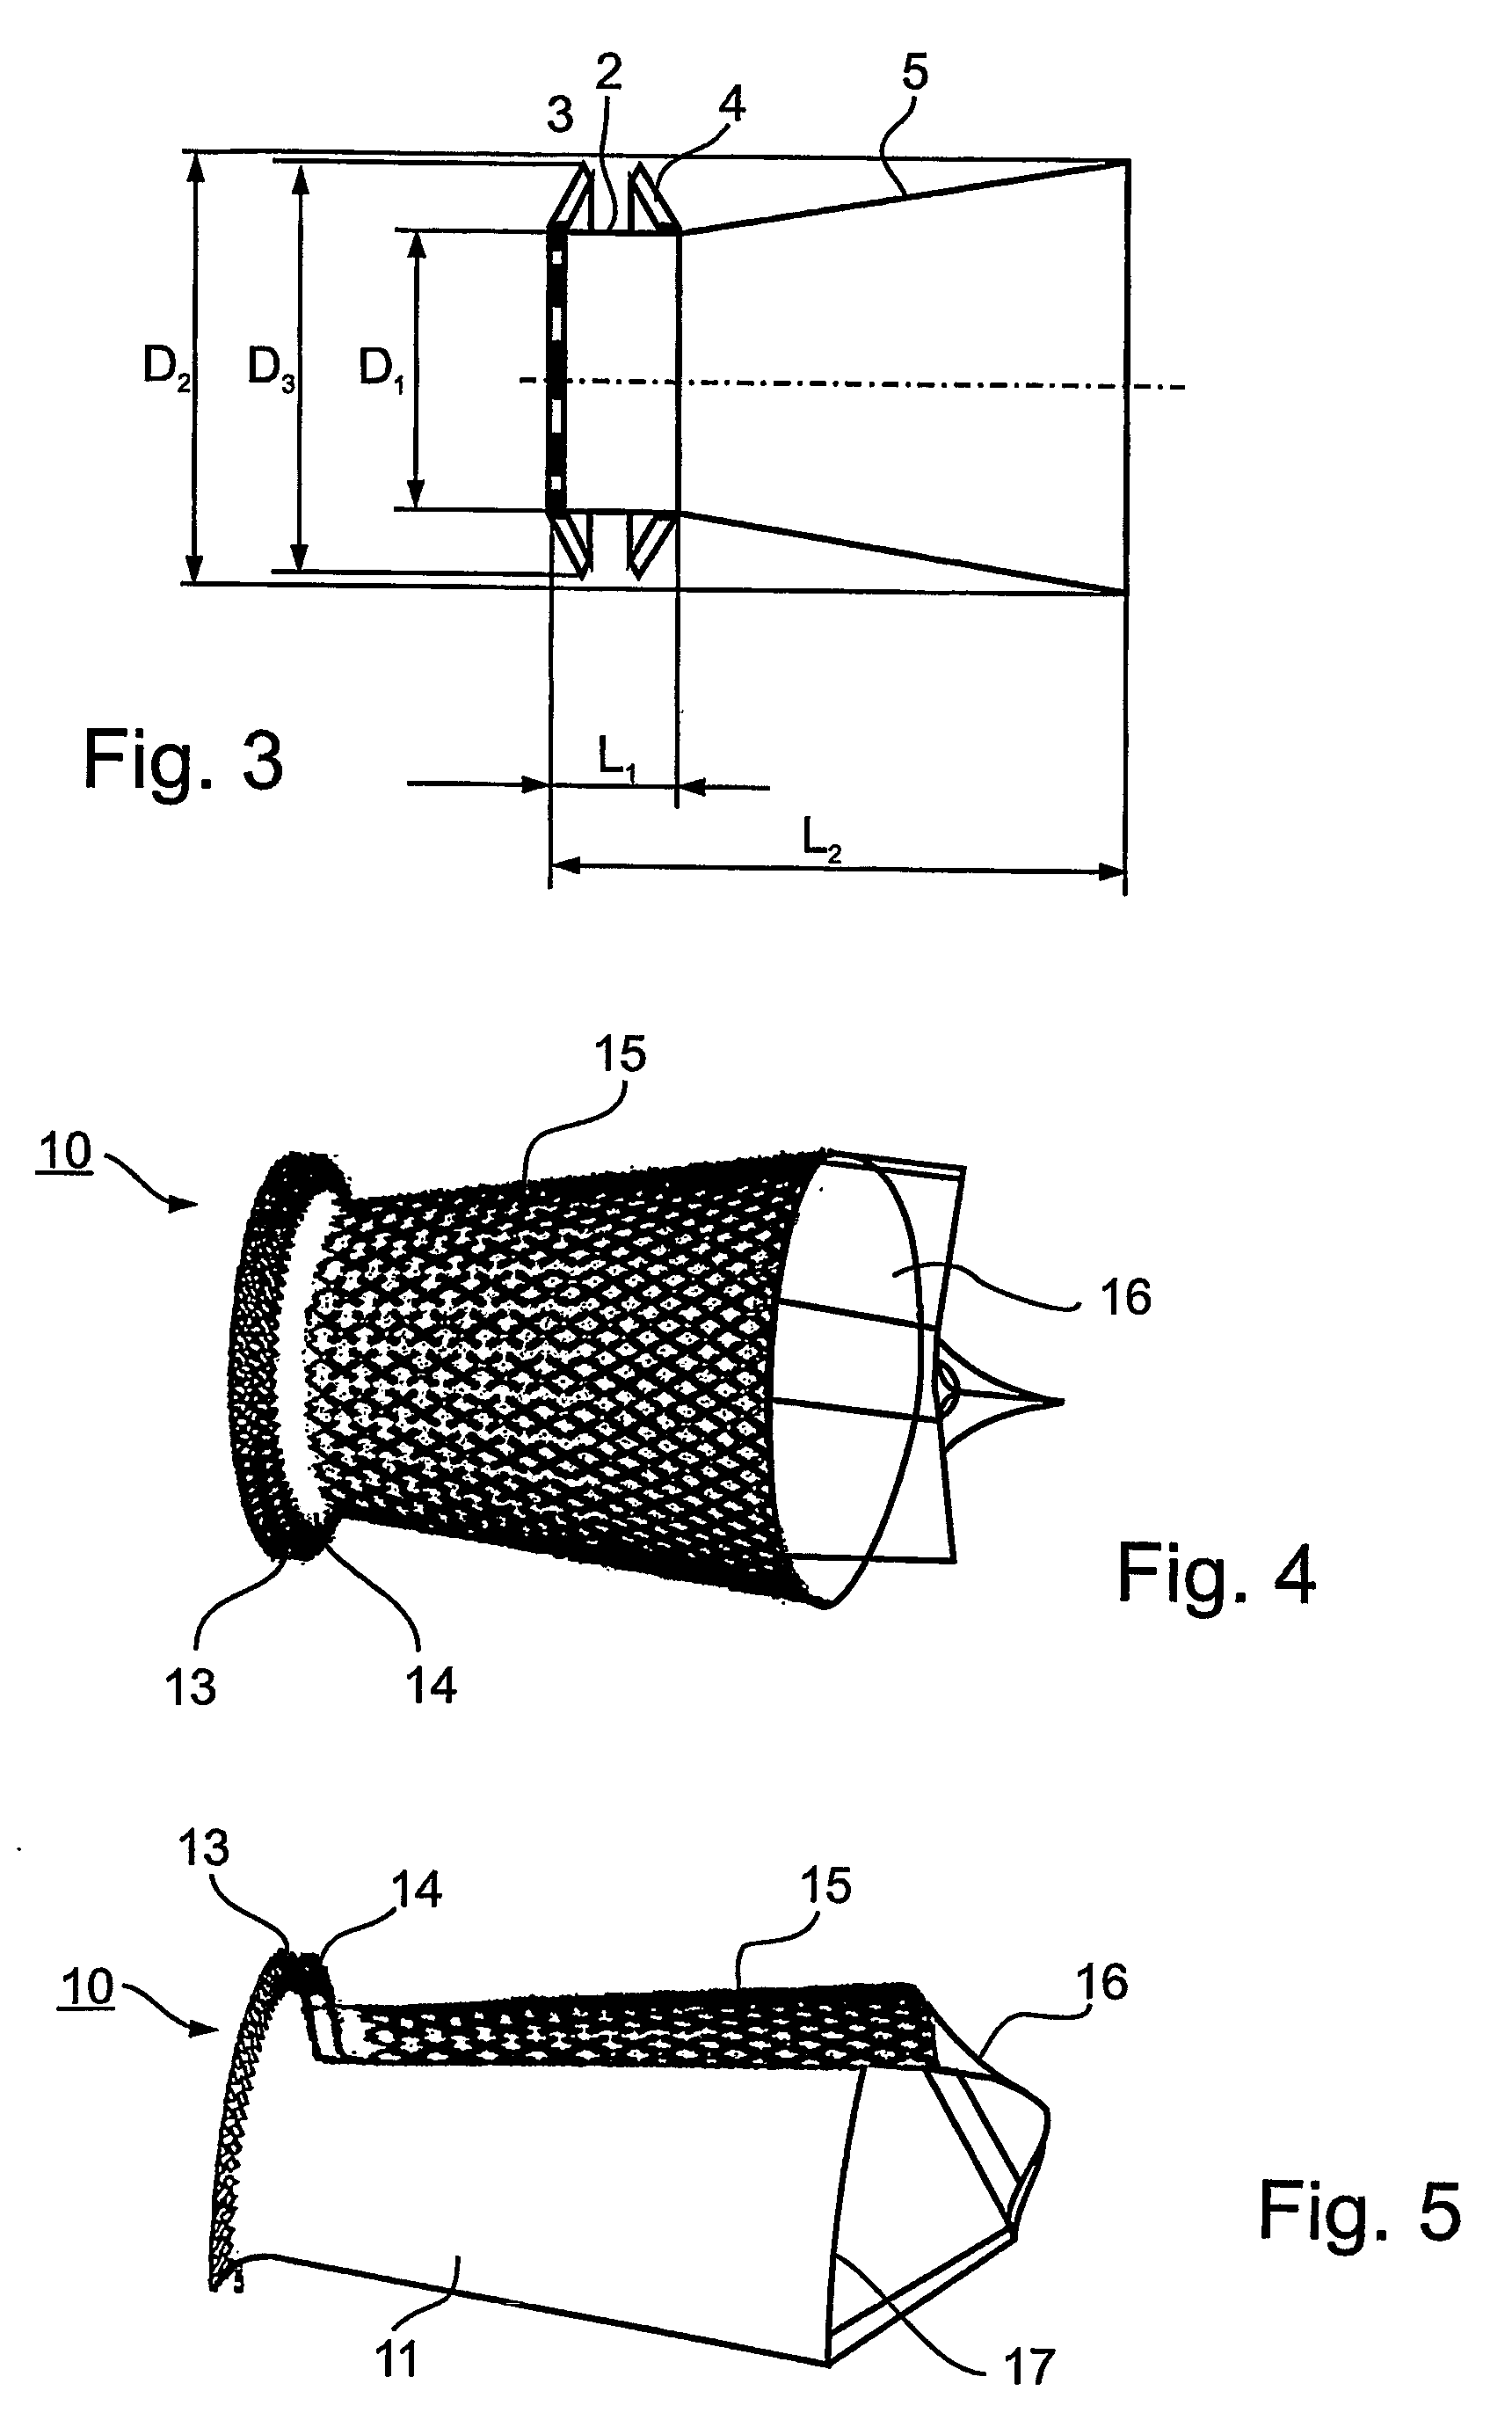 Implantable prosthetic devices particularly for transarterial delivery in the treatment of aortic stenosis, and methods of implanting such devices